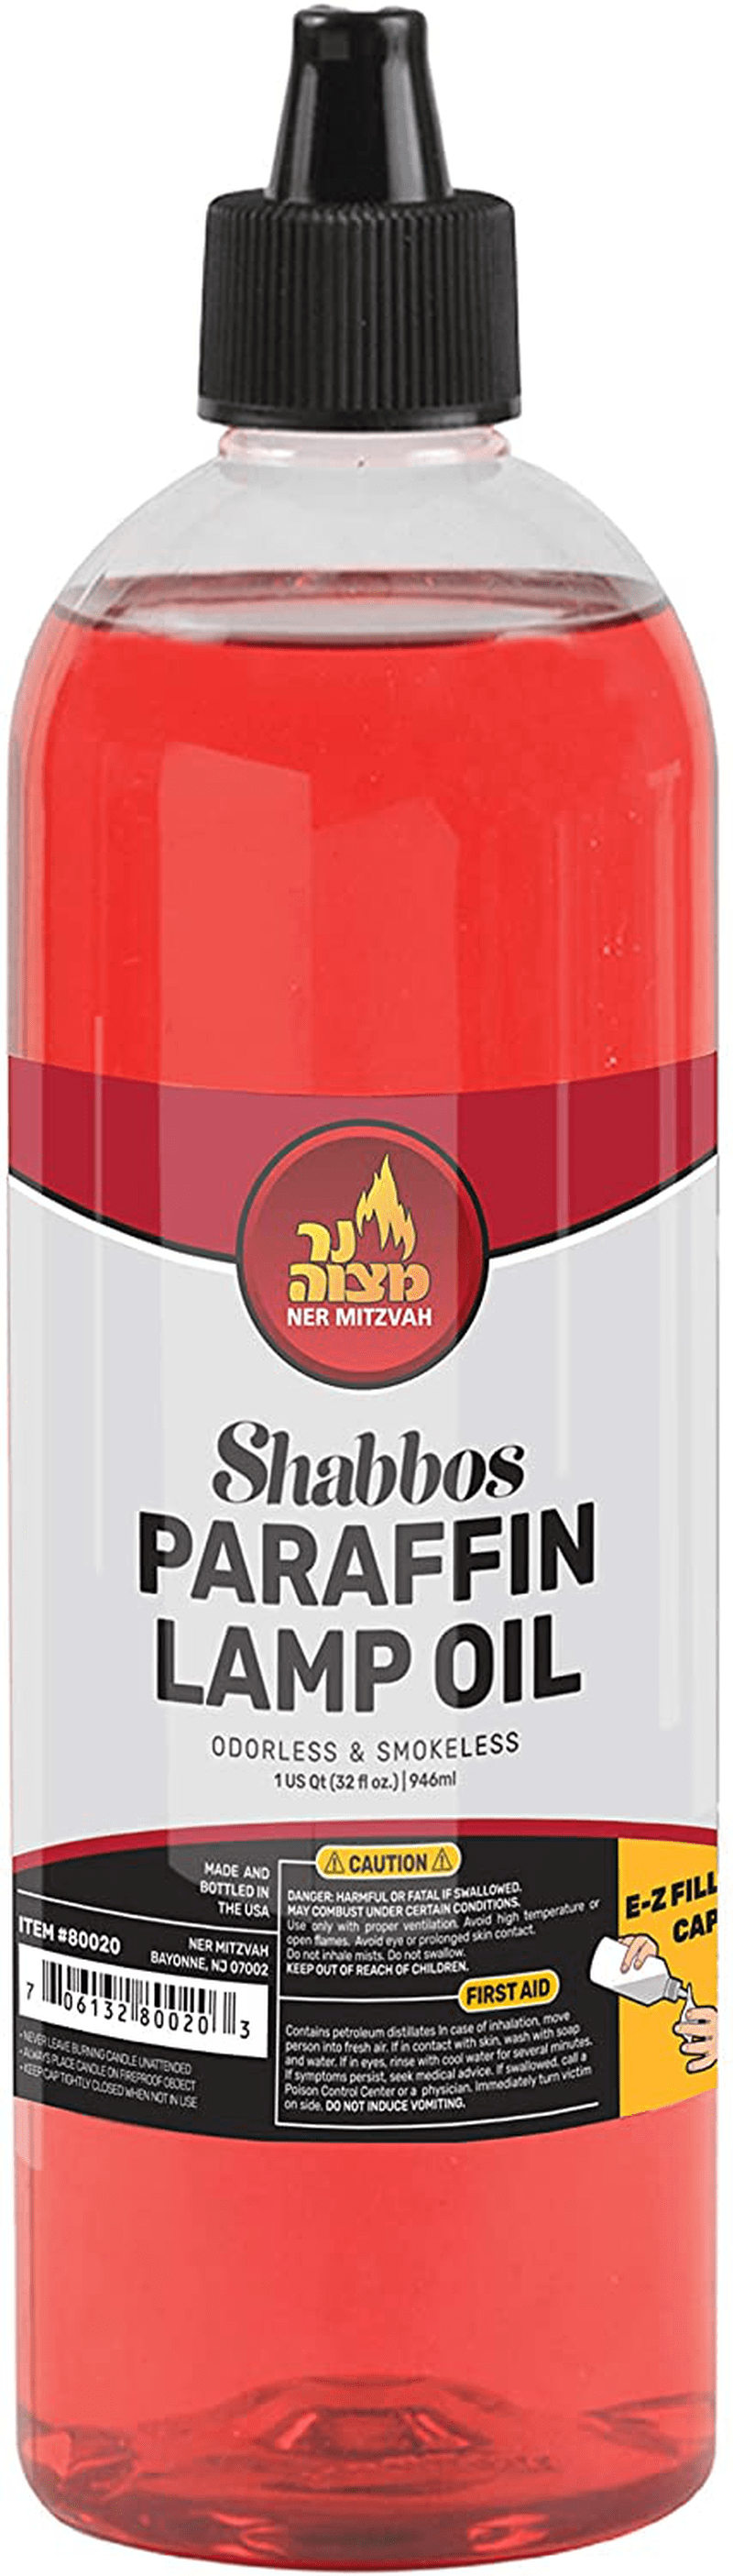 Paraffin Lamp Oil - Red Smokeless, Odorless, Clean Burning Fuel for Indoor and Outdoor Use with E-Z Fill Cap and Pouring Spout - 32oz - by Ner Mitzvah Home & Garden > Lighting Accessories > Oil Lamp Fuel Ner Mitzvah Default Title  